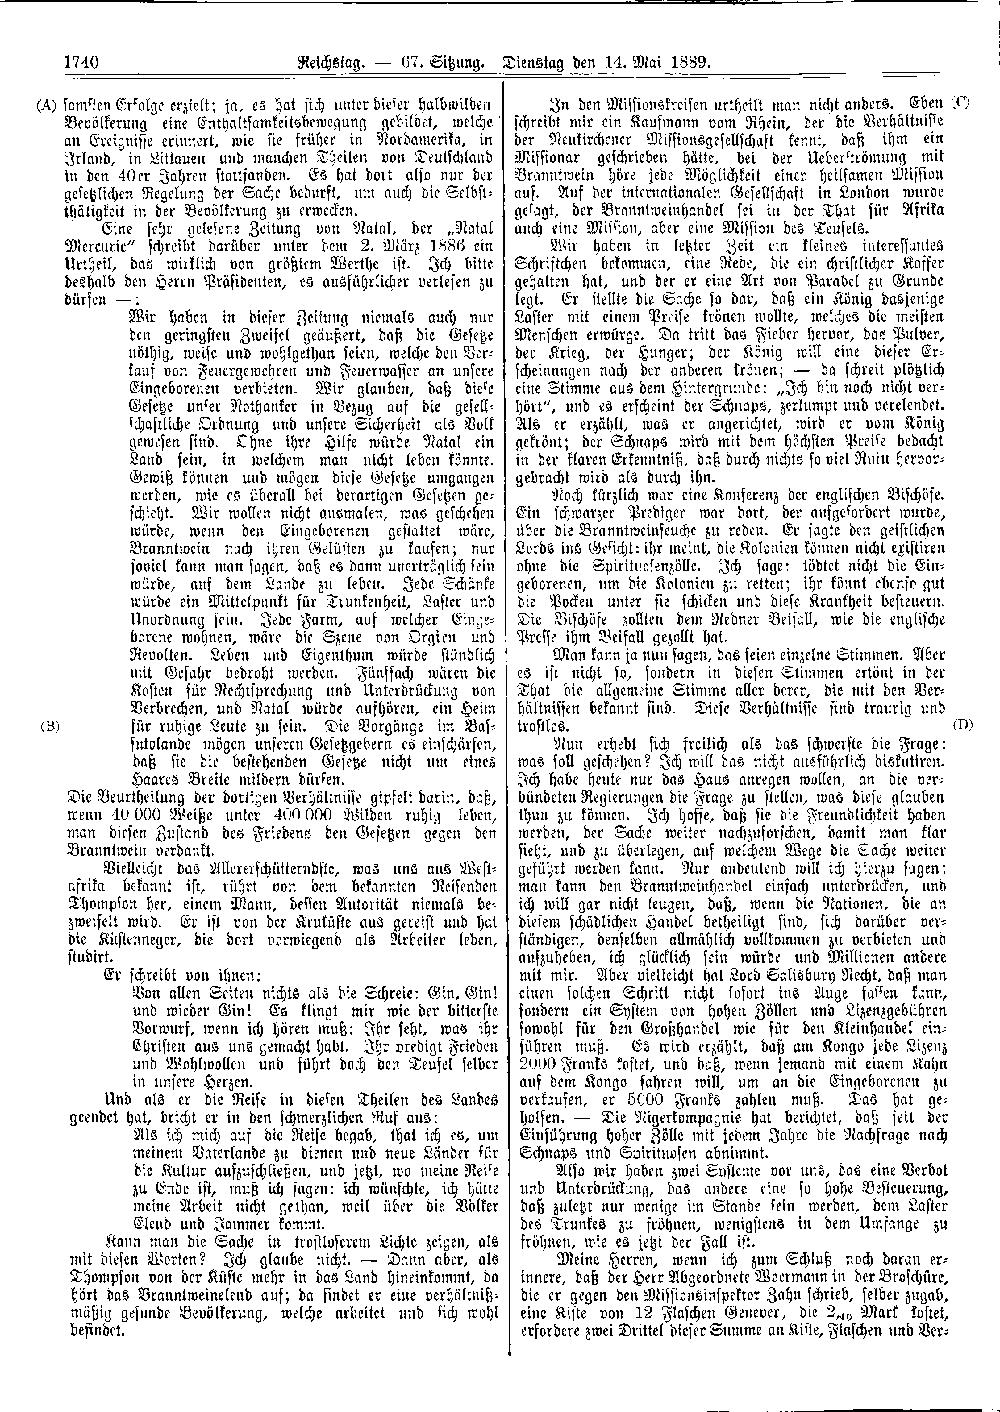 Scan of page 1740